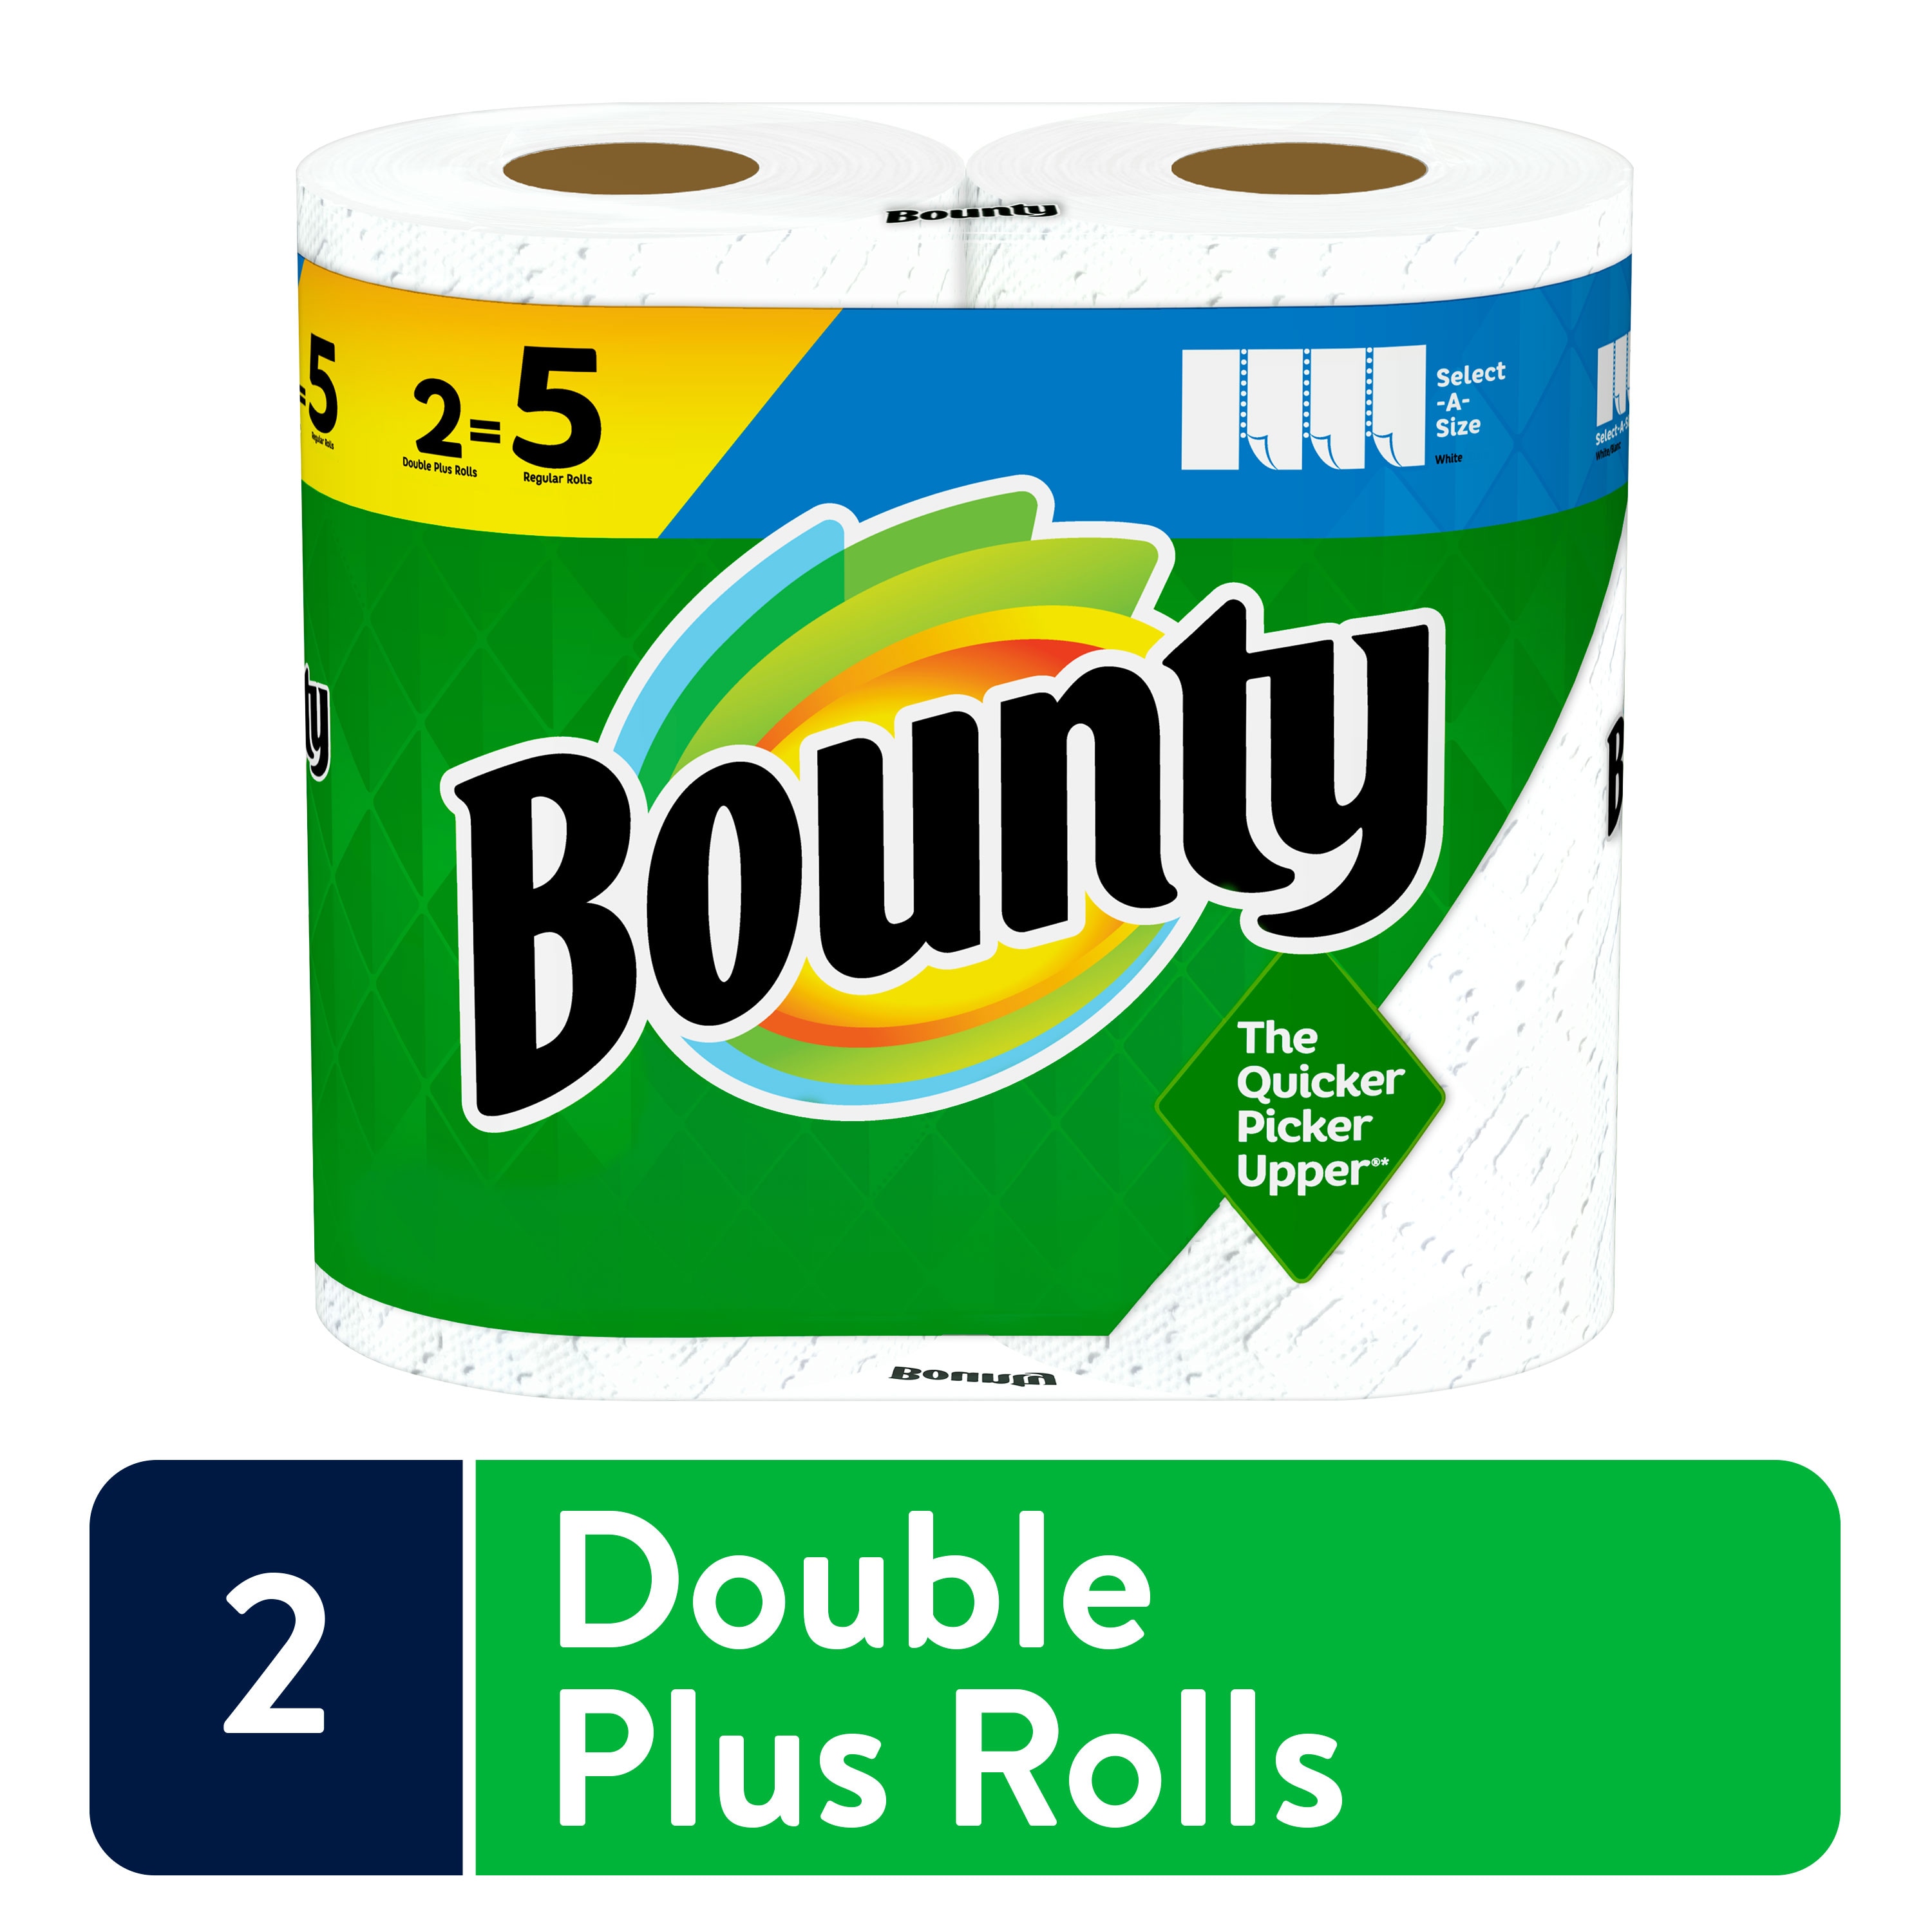 Did you know Bounty Sells The Biggest Roll of Paper Towels?